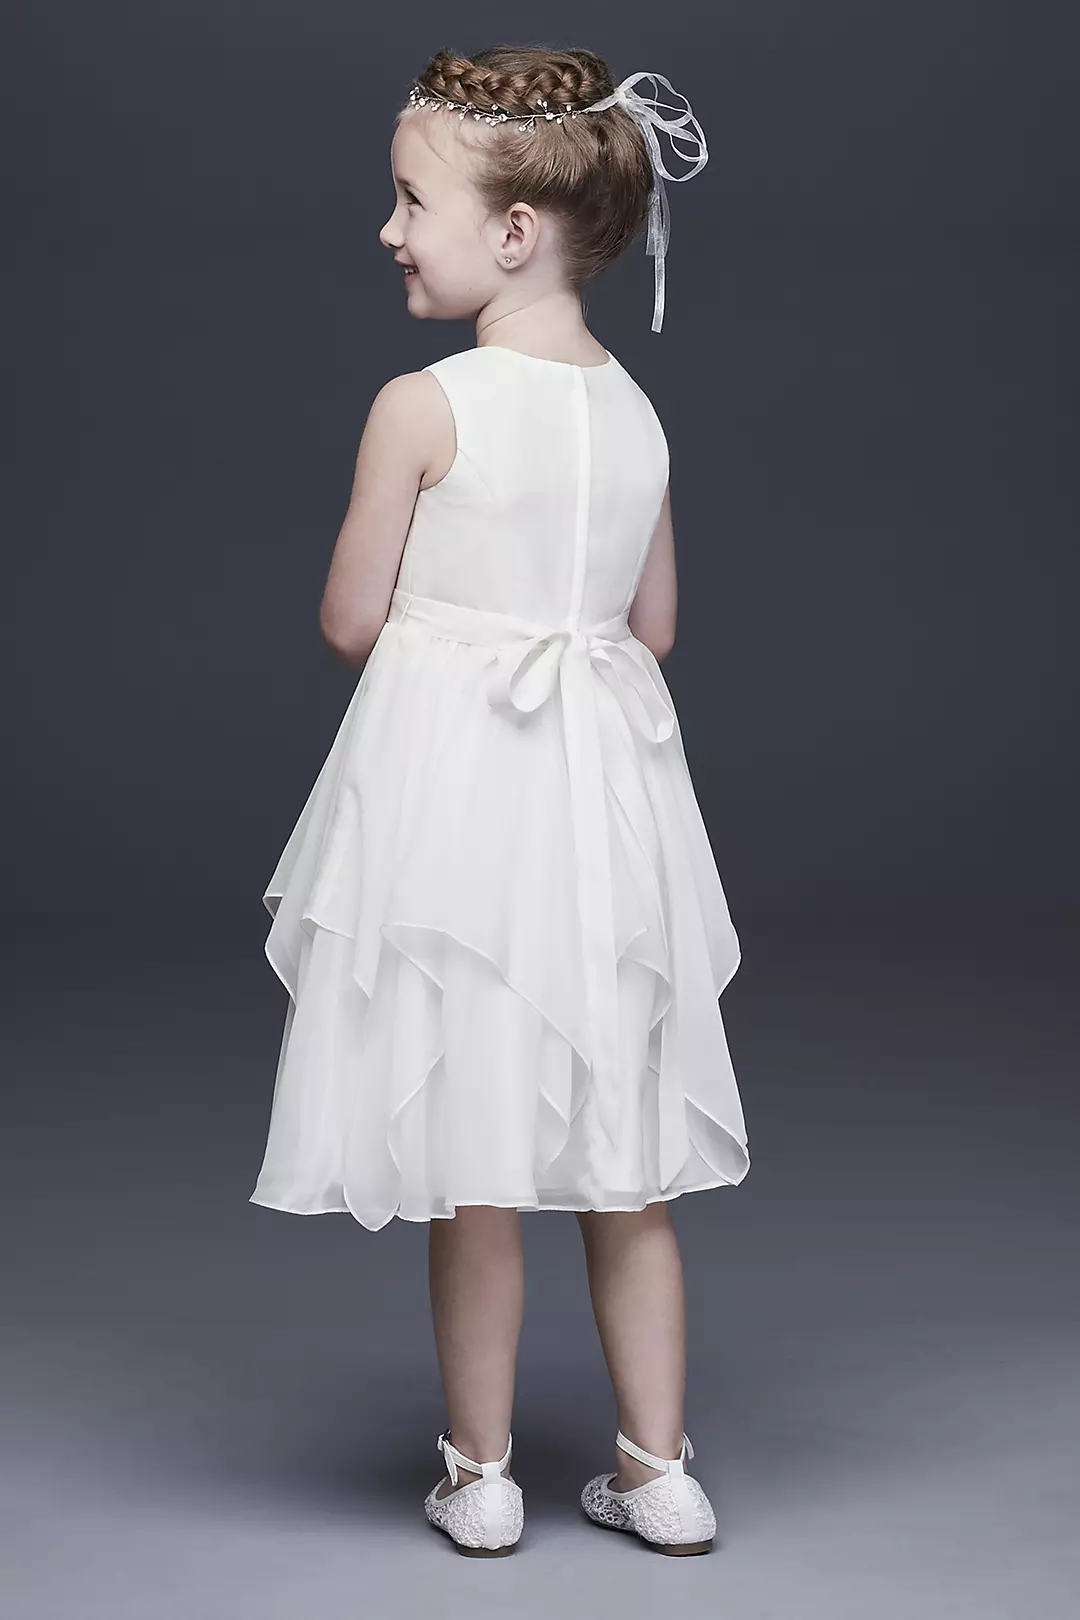 As-Is Chiffon Flower Girl Dress with Bow Sash Image 2